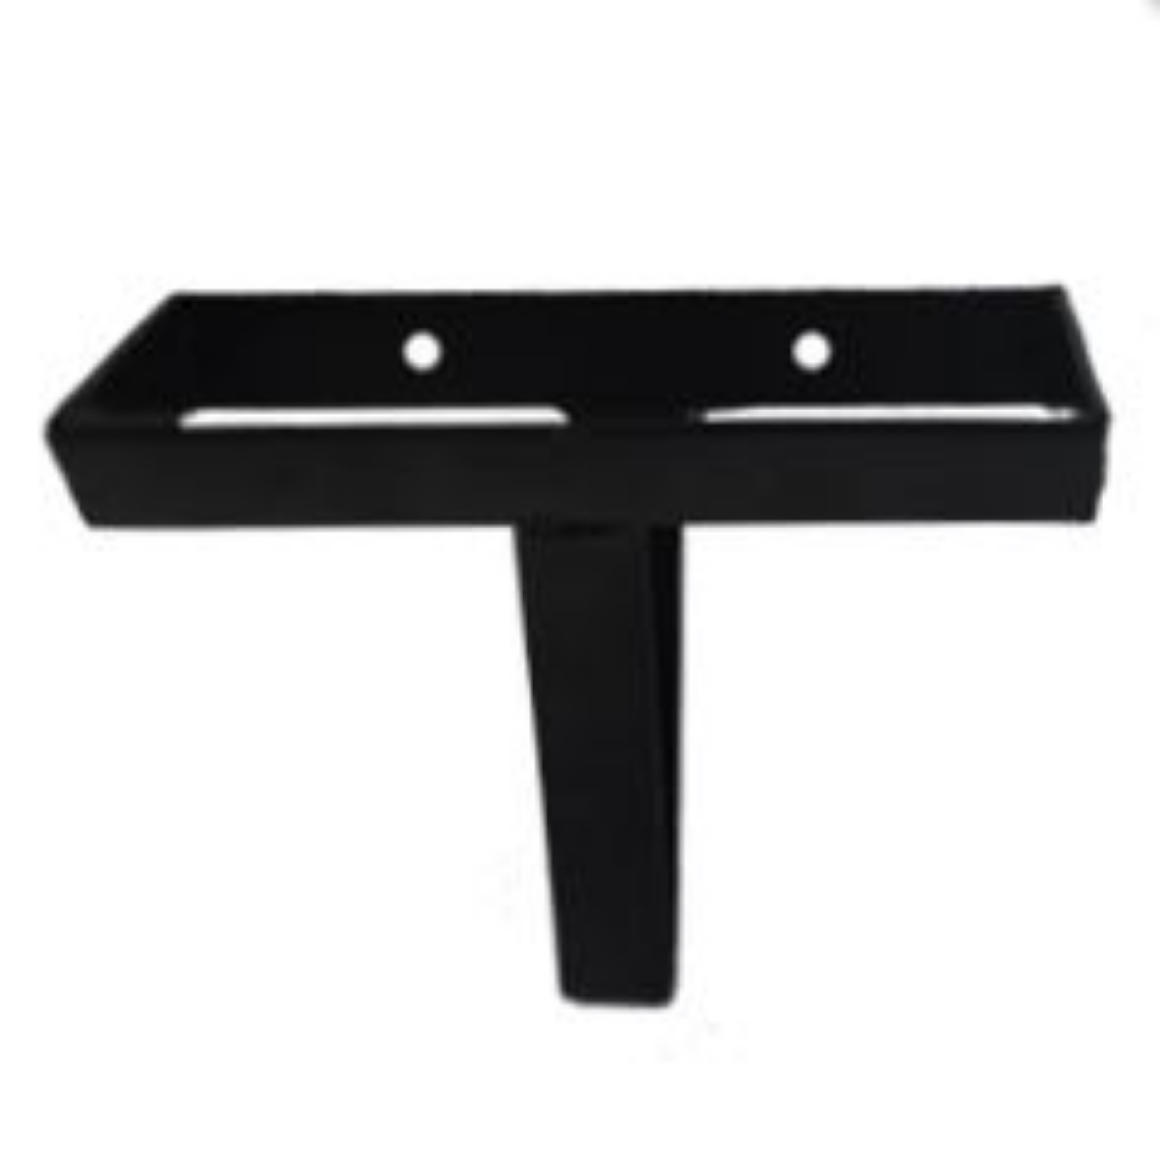 Picture of Metal Bracket to Suit 10772 Urethane Wheel Chock
100mm (W) x 190mm (L) x 160mm (H)
Has 2 Holes in Bracket for Bolting Down
Black in Colour